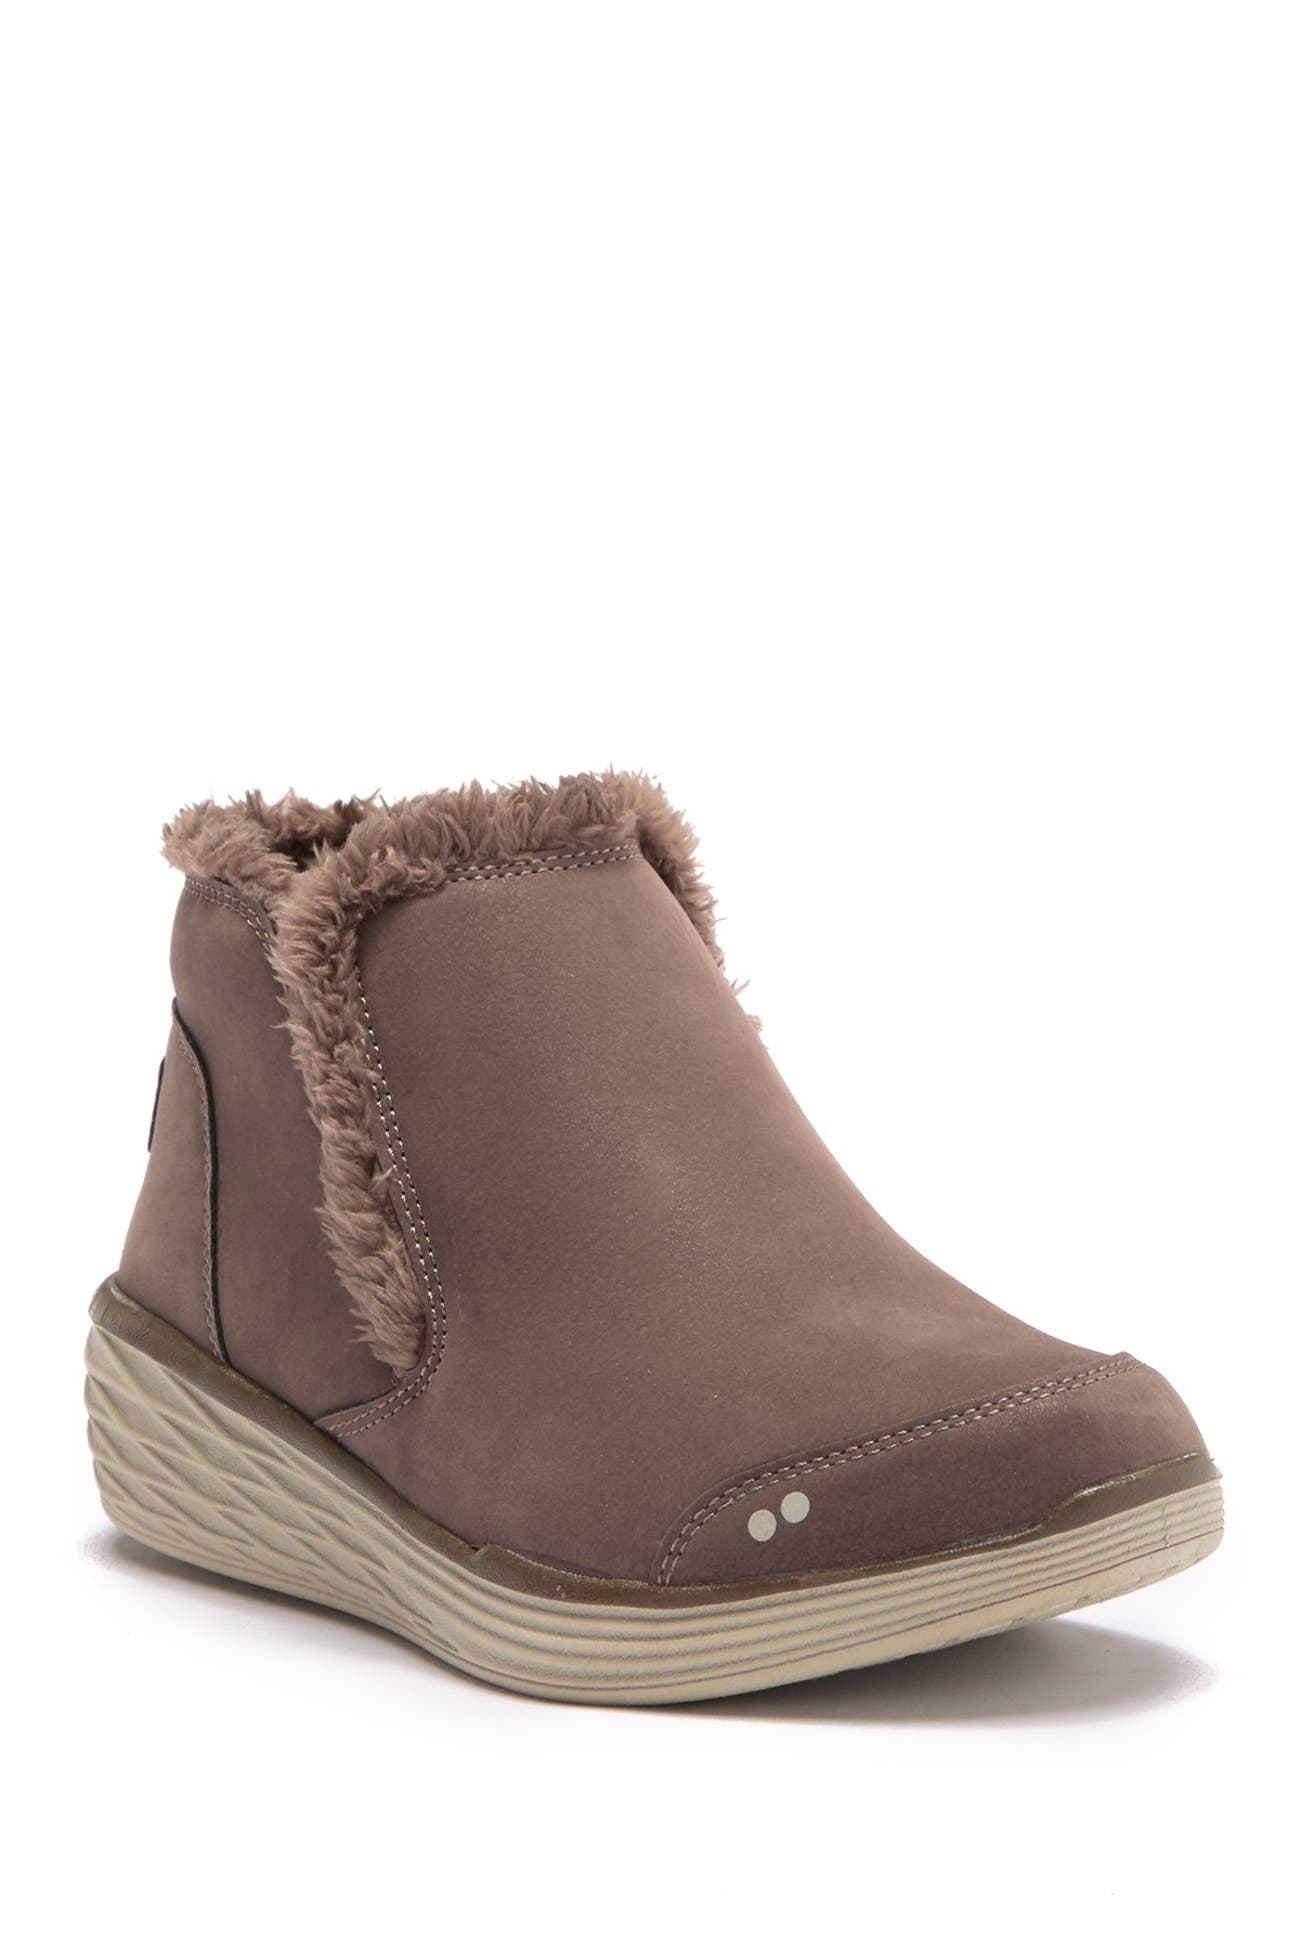 Ryka | Namaste Faux Fur Lined Ankle Boot - Wide Width Available ...